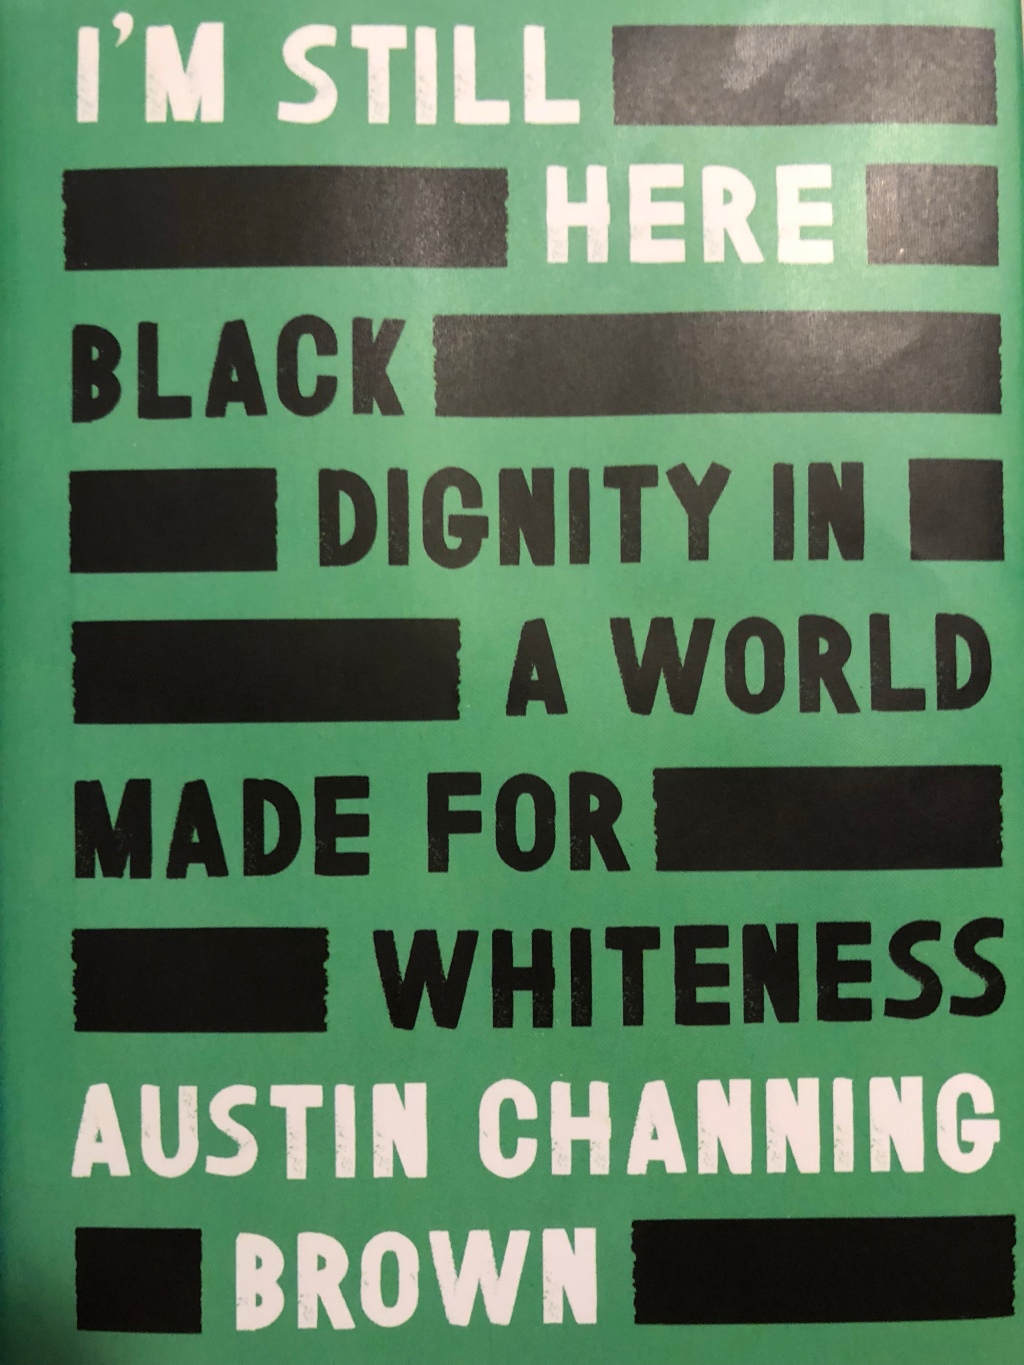 Book Review: “I’m Still Here – Black Dignity in a World Made for Whiteness.”